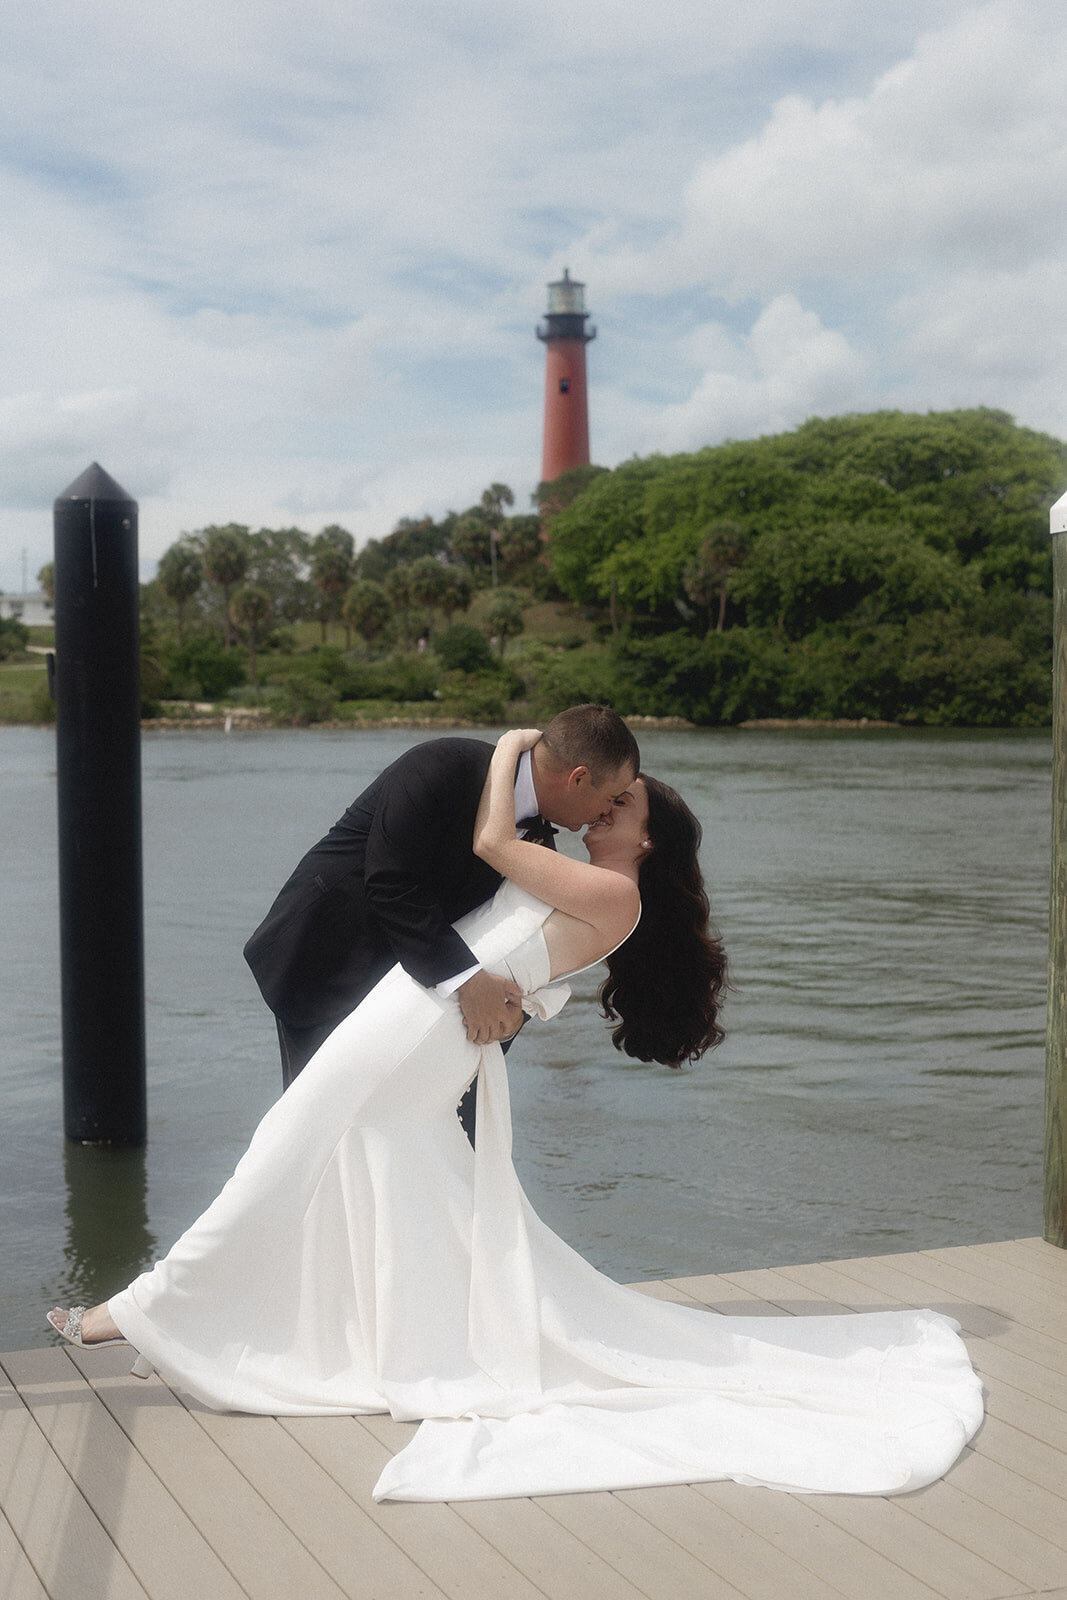 Bride and groom kissing with lake and lighthouse in the background